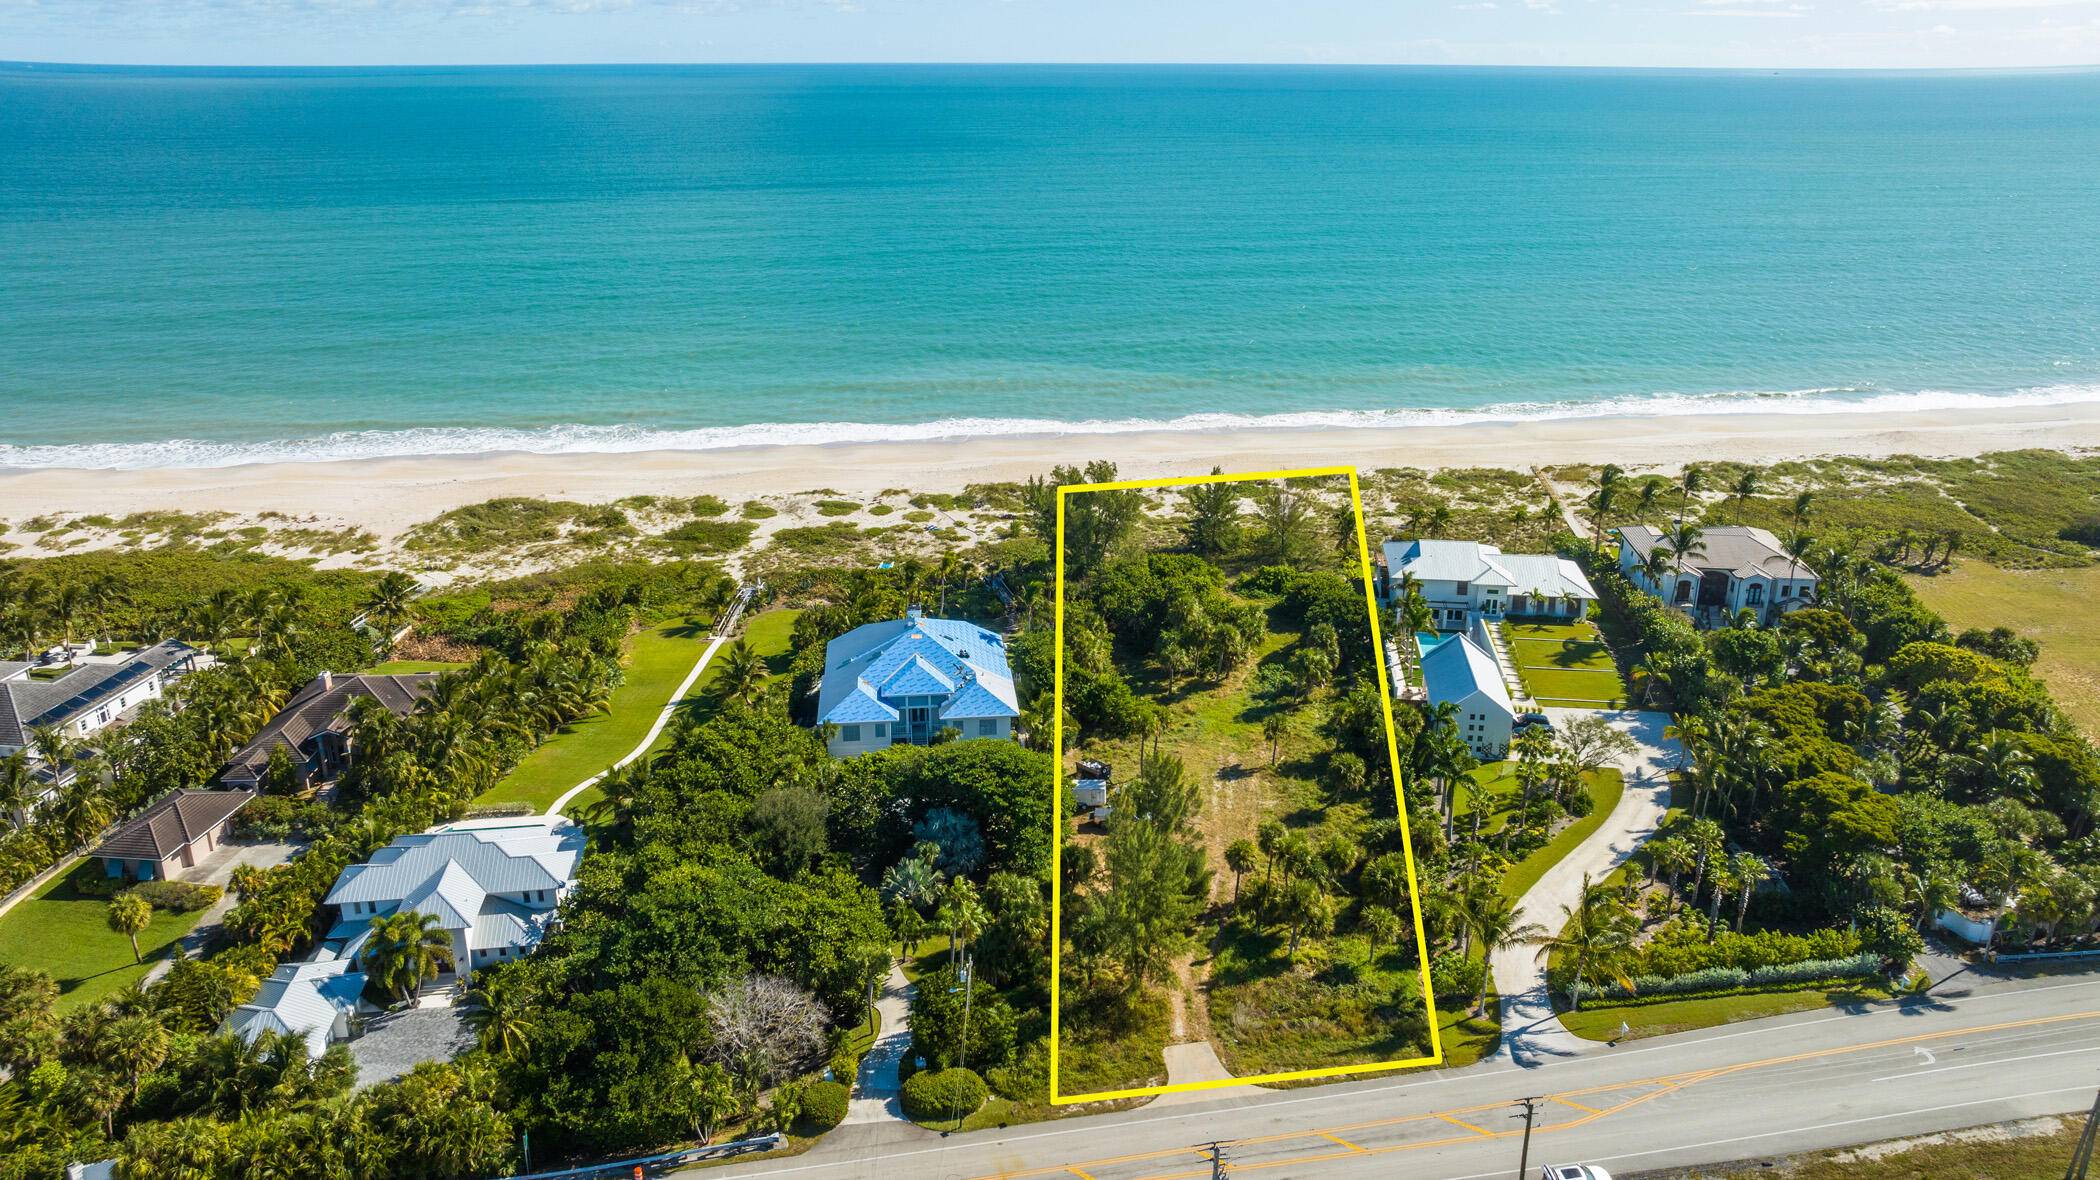 An unrivaled opportunity to own 2 Acres of prime oceanfront property on one of the only accreting beaches on Florida's Atlantic Coast.